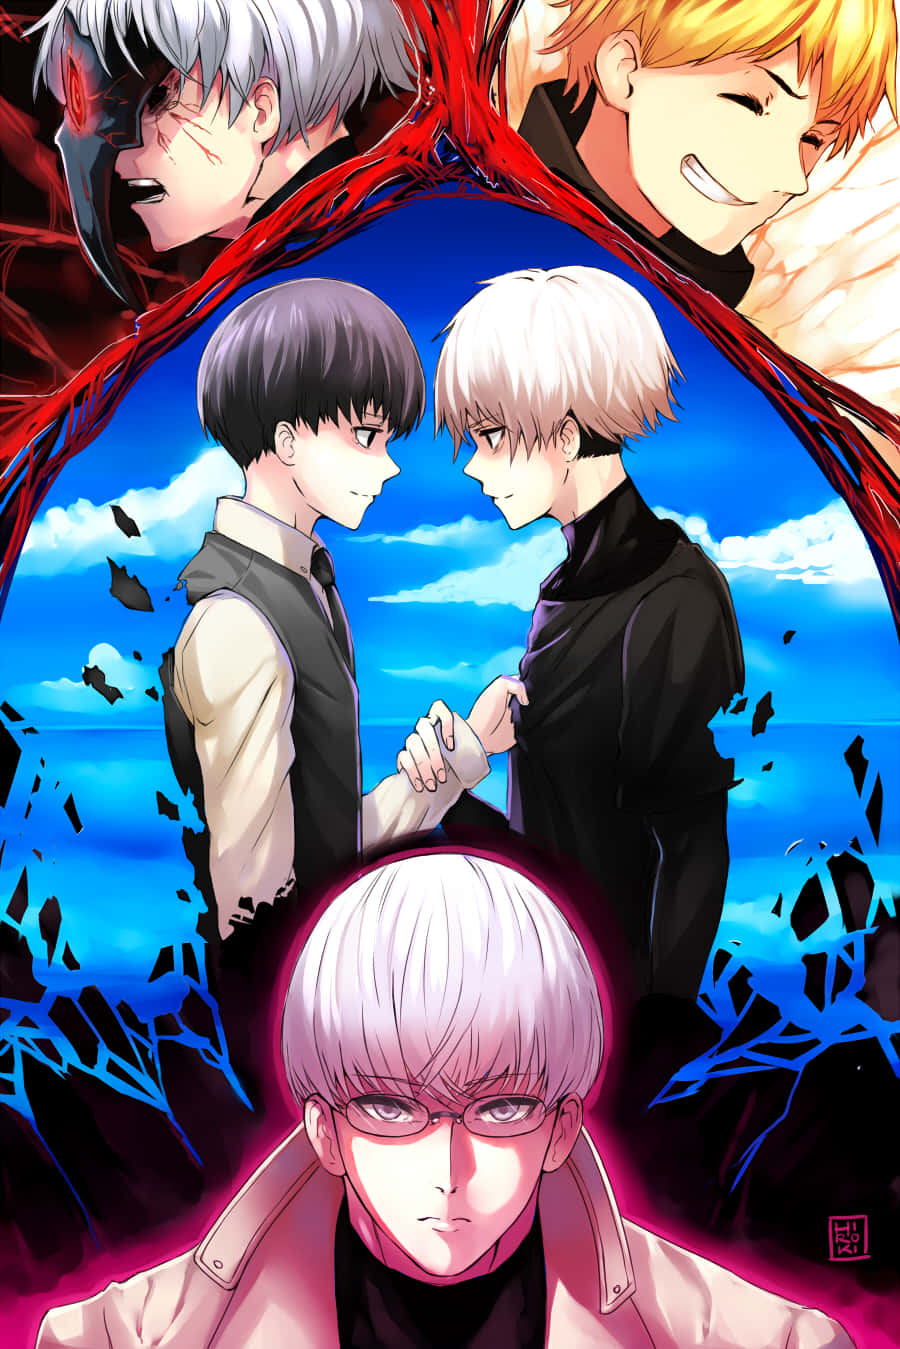 Kishou Arima, the SSS-rated ghoul investigator, standing strong in battle Wallpaper